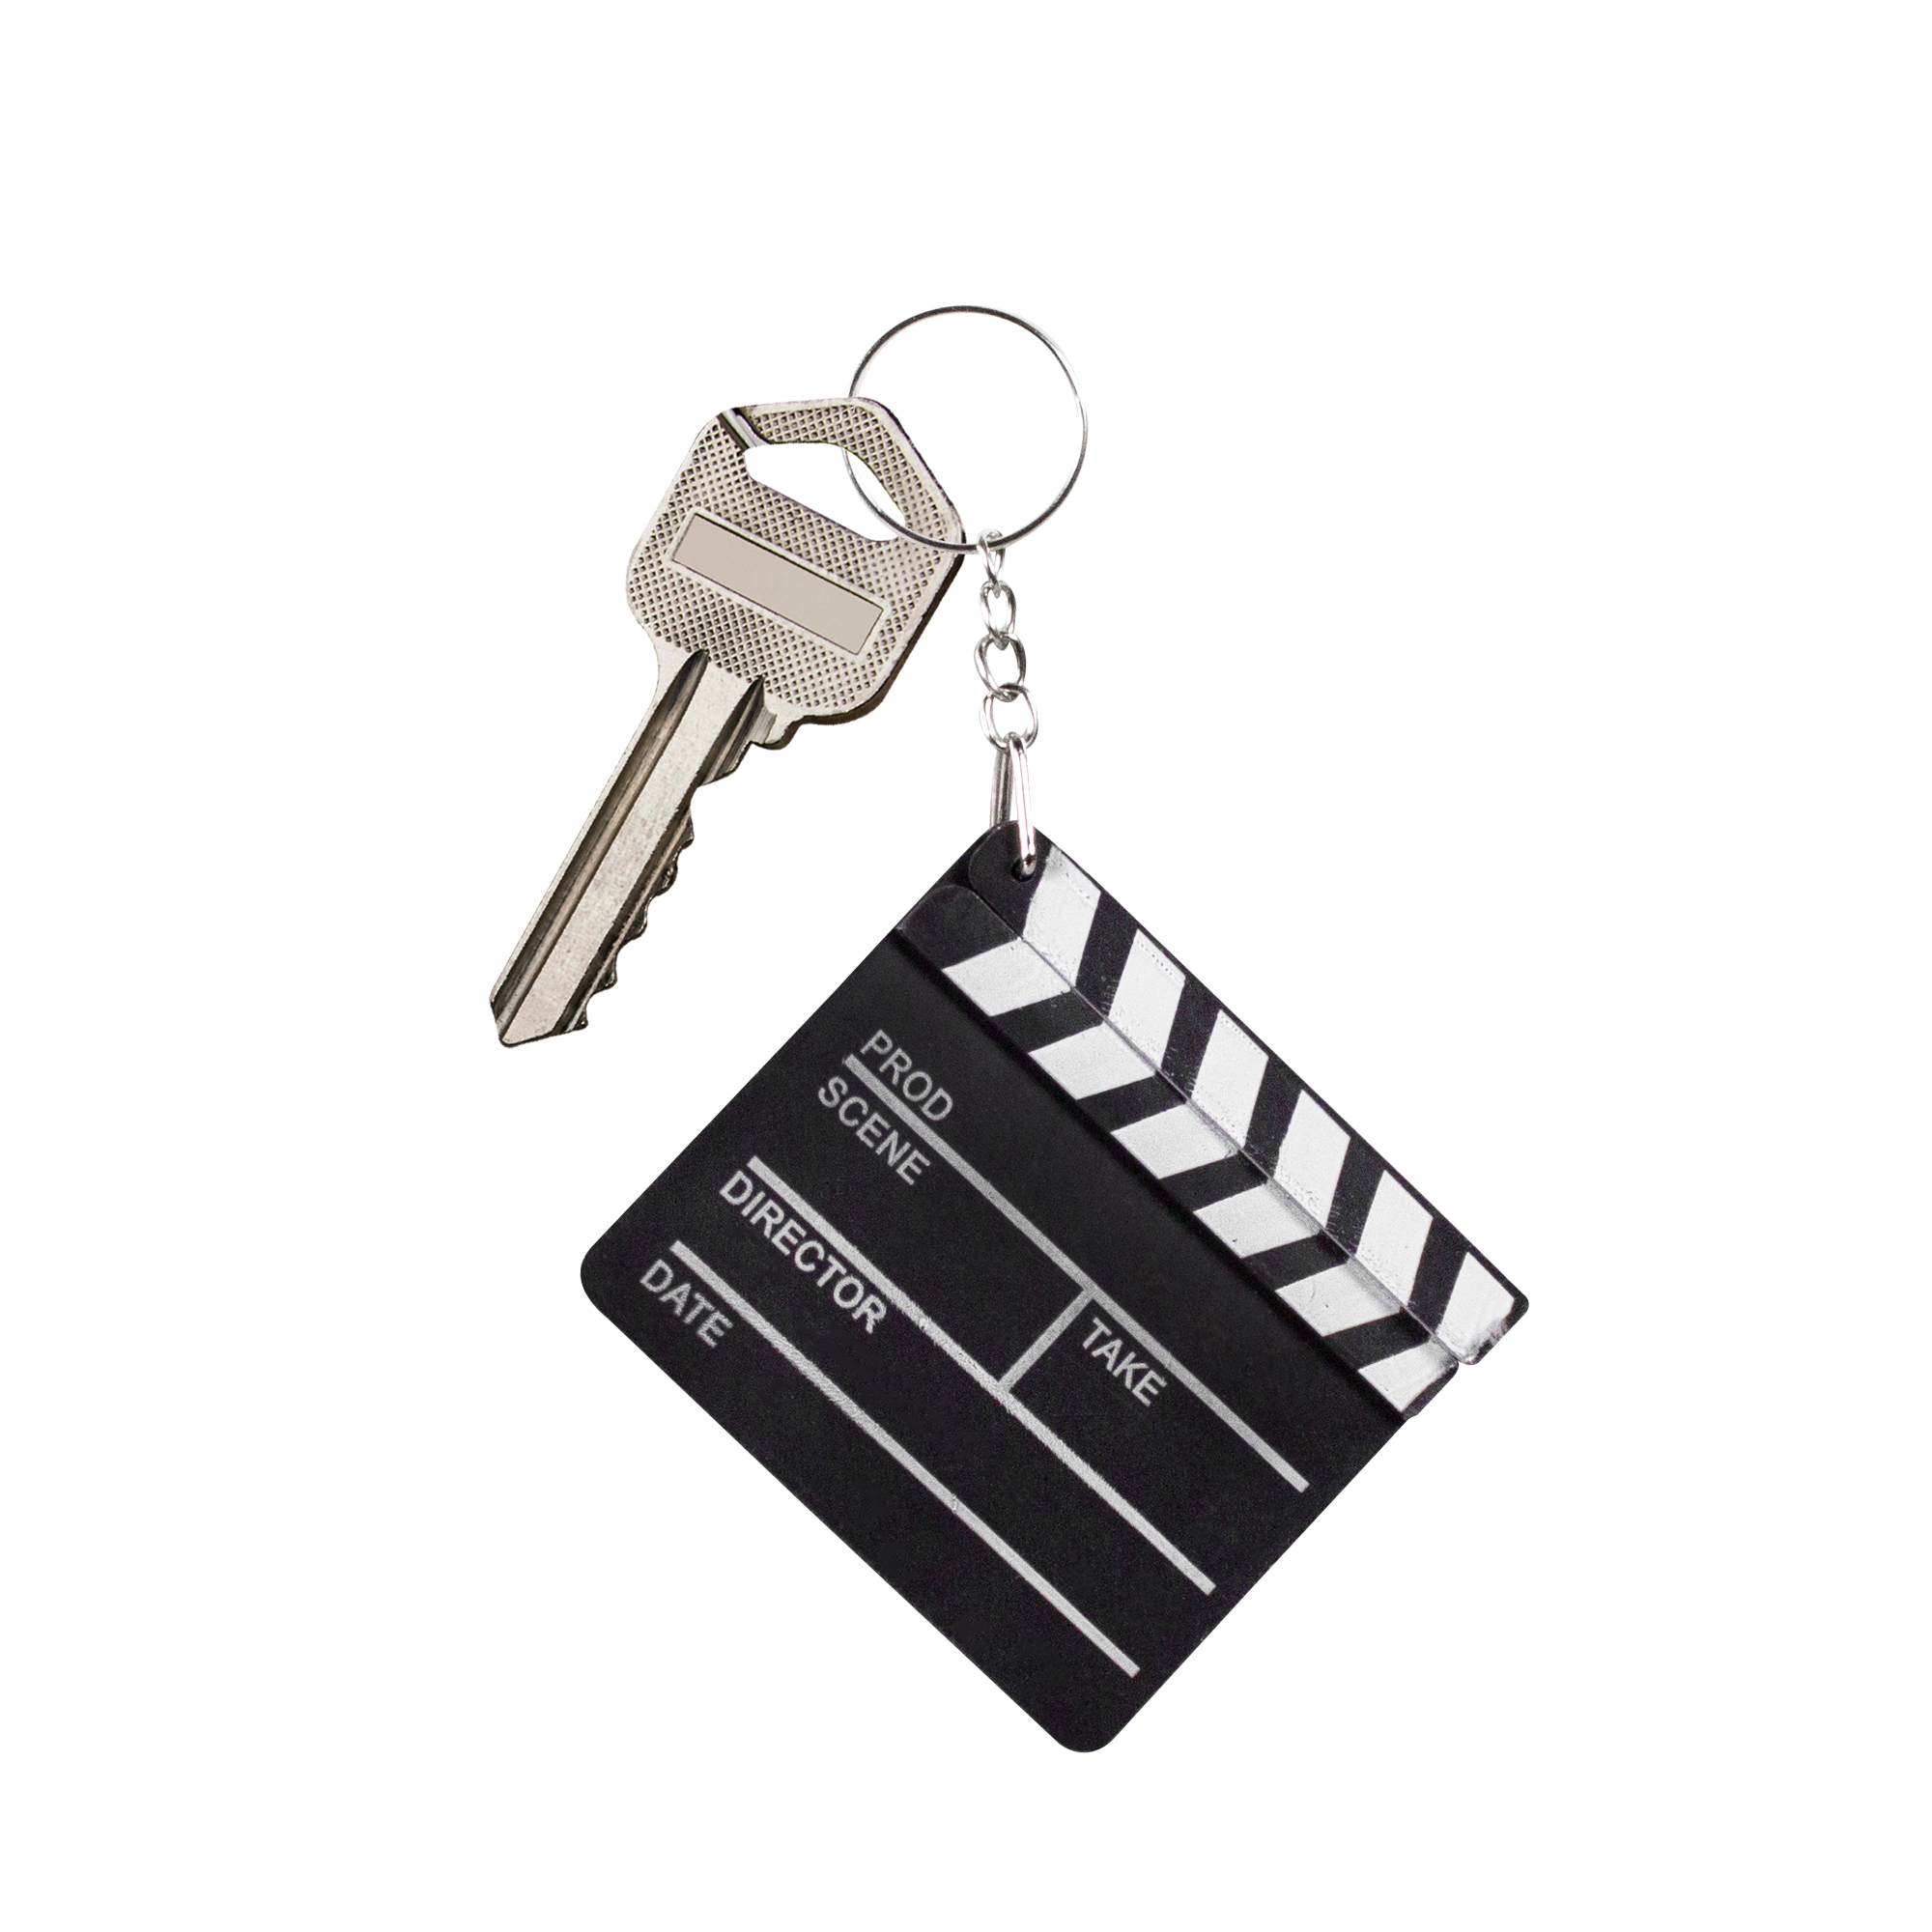 Hollywood Clapboard Keychains by Windy City Novelties